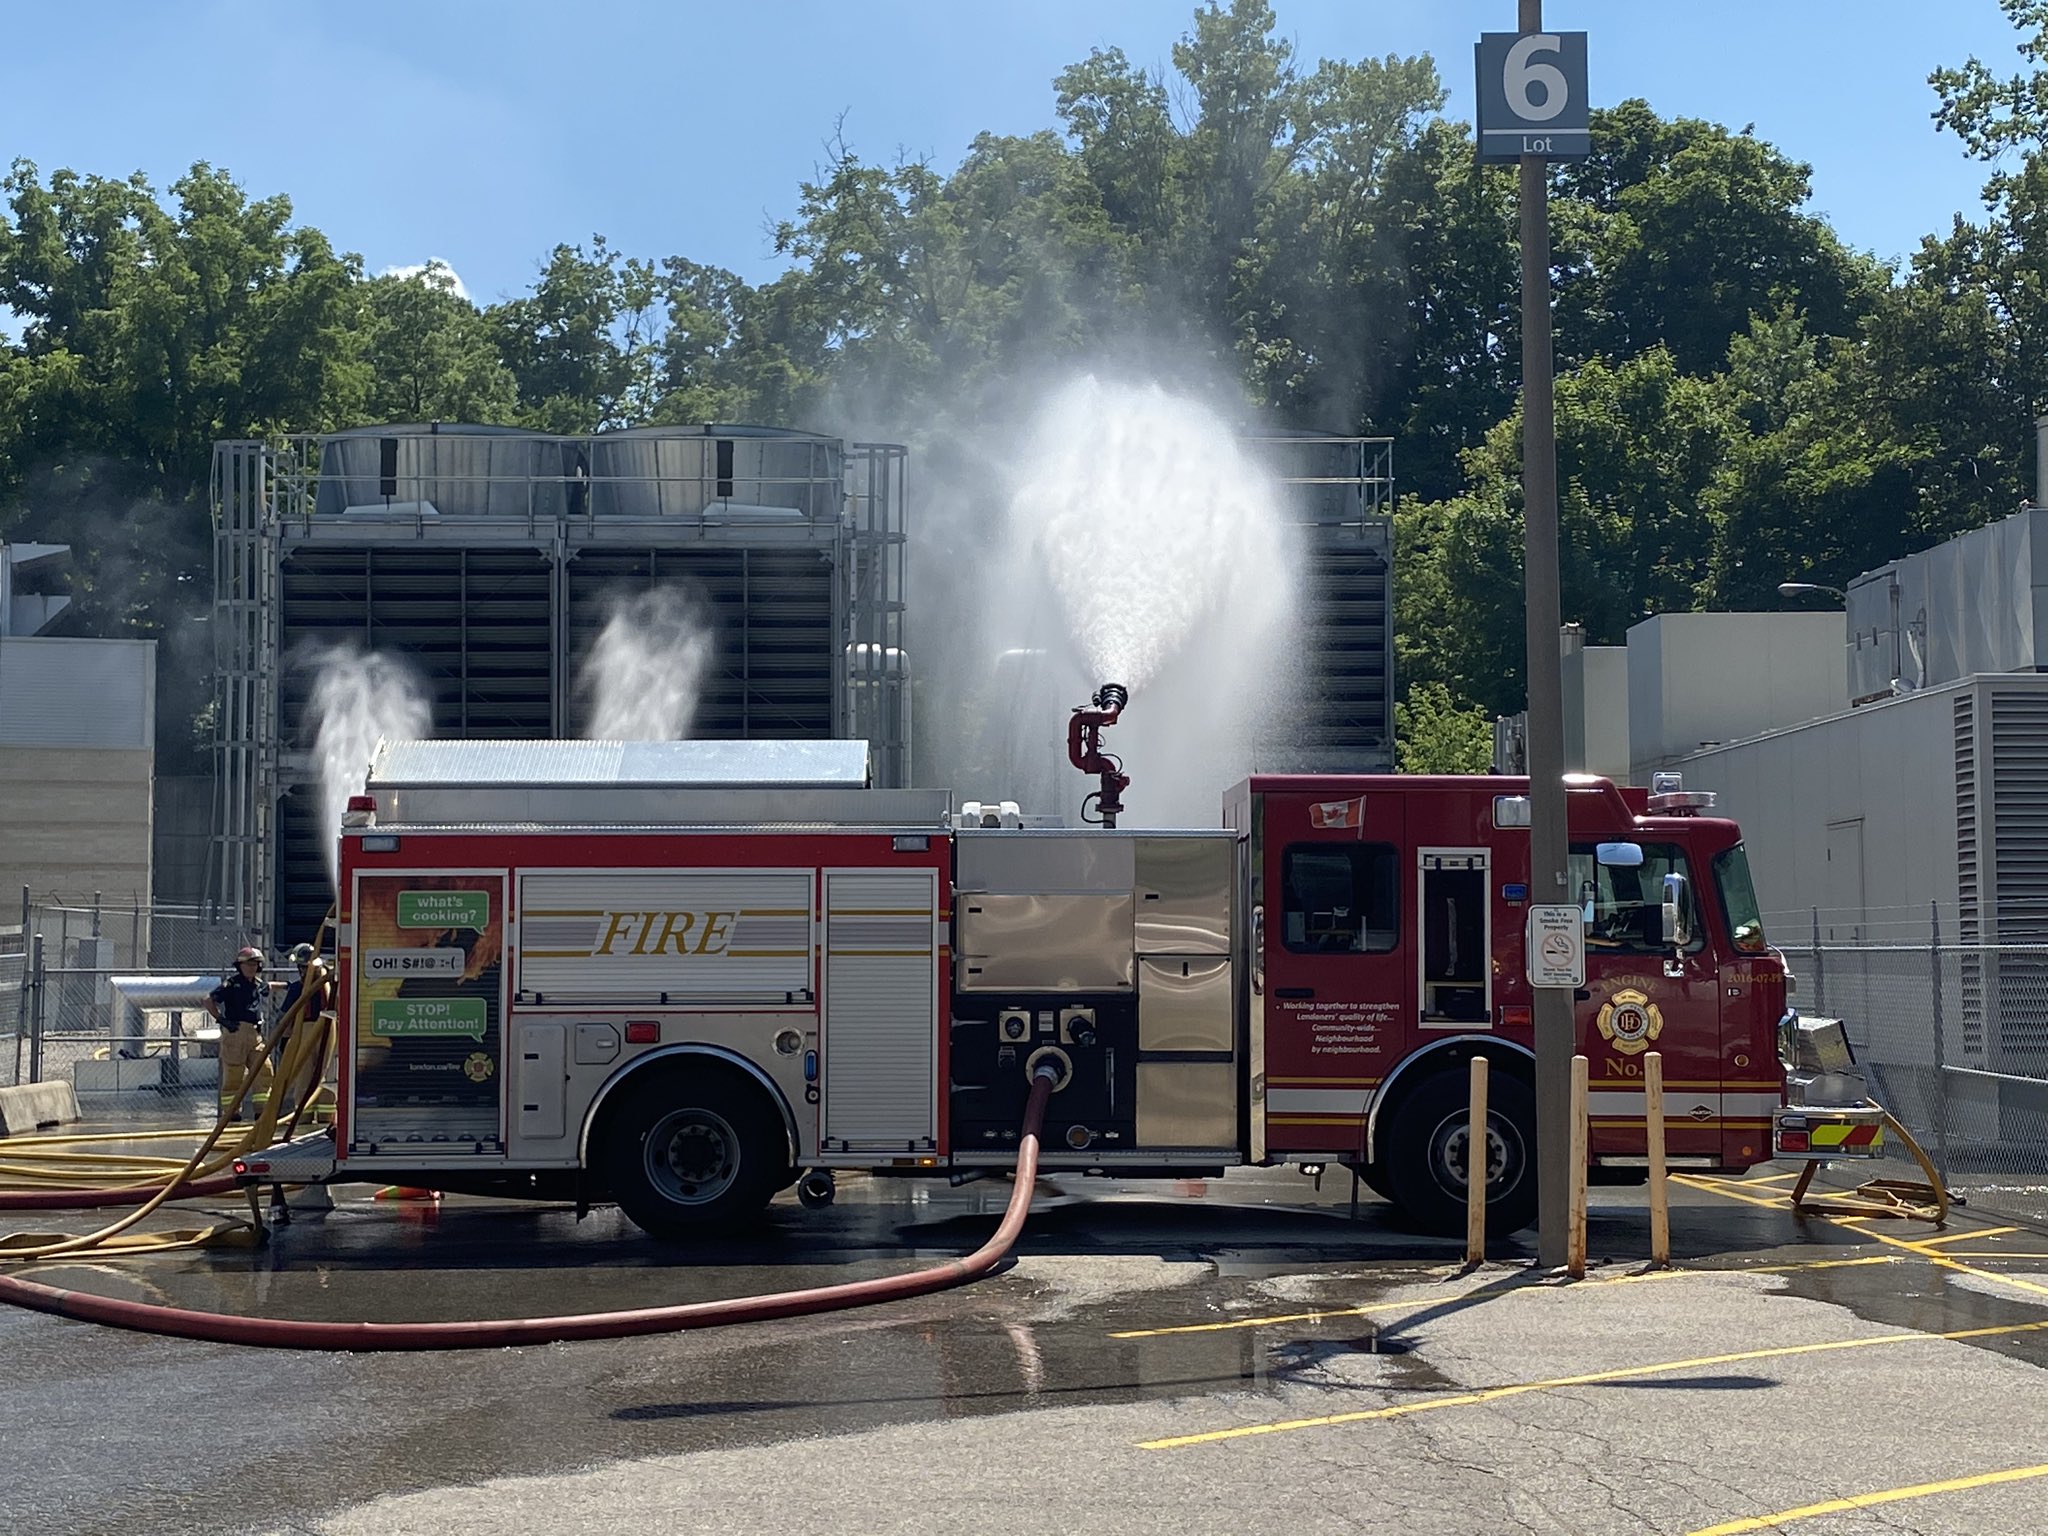 A fire truck spraying water out of a hose attached to the truck